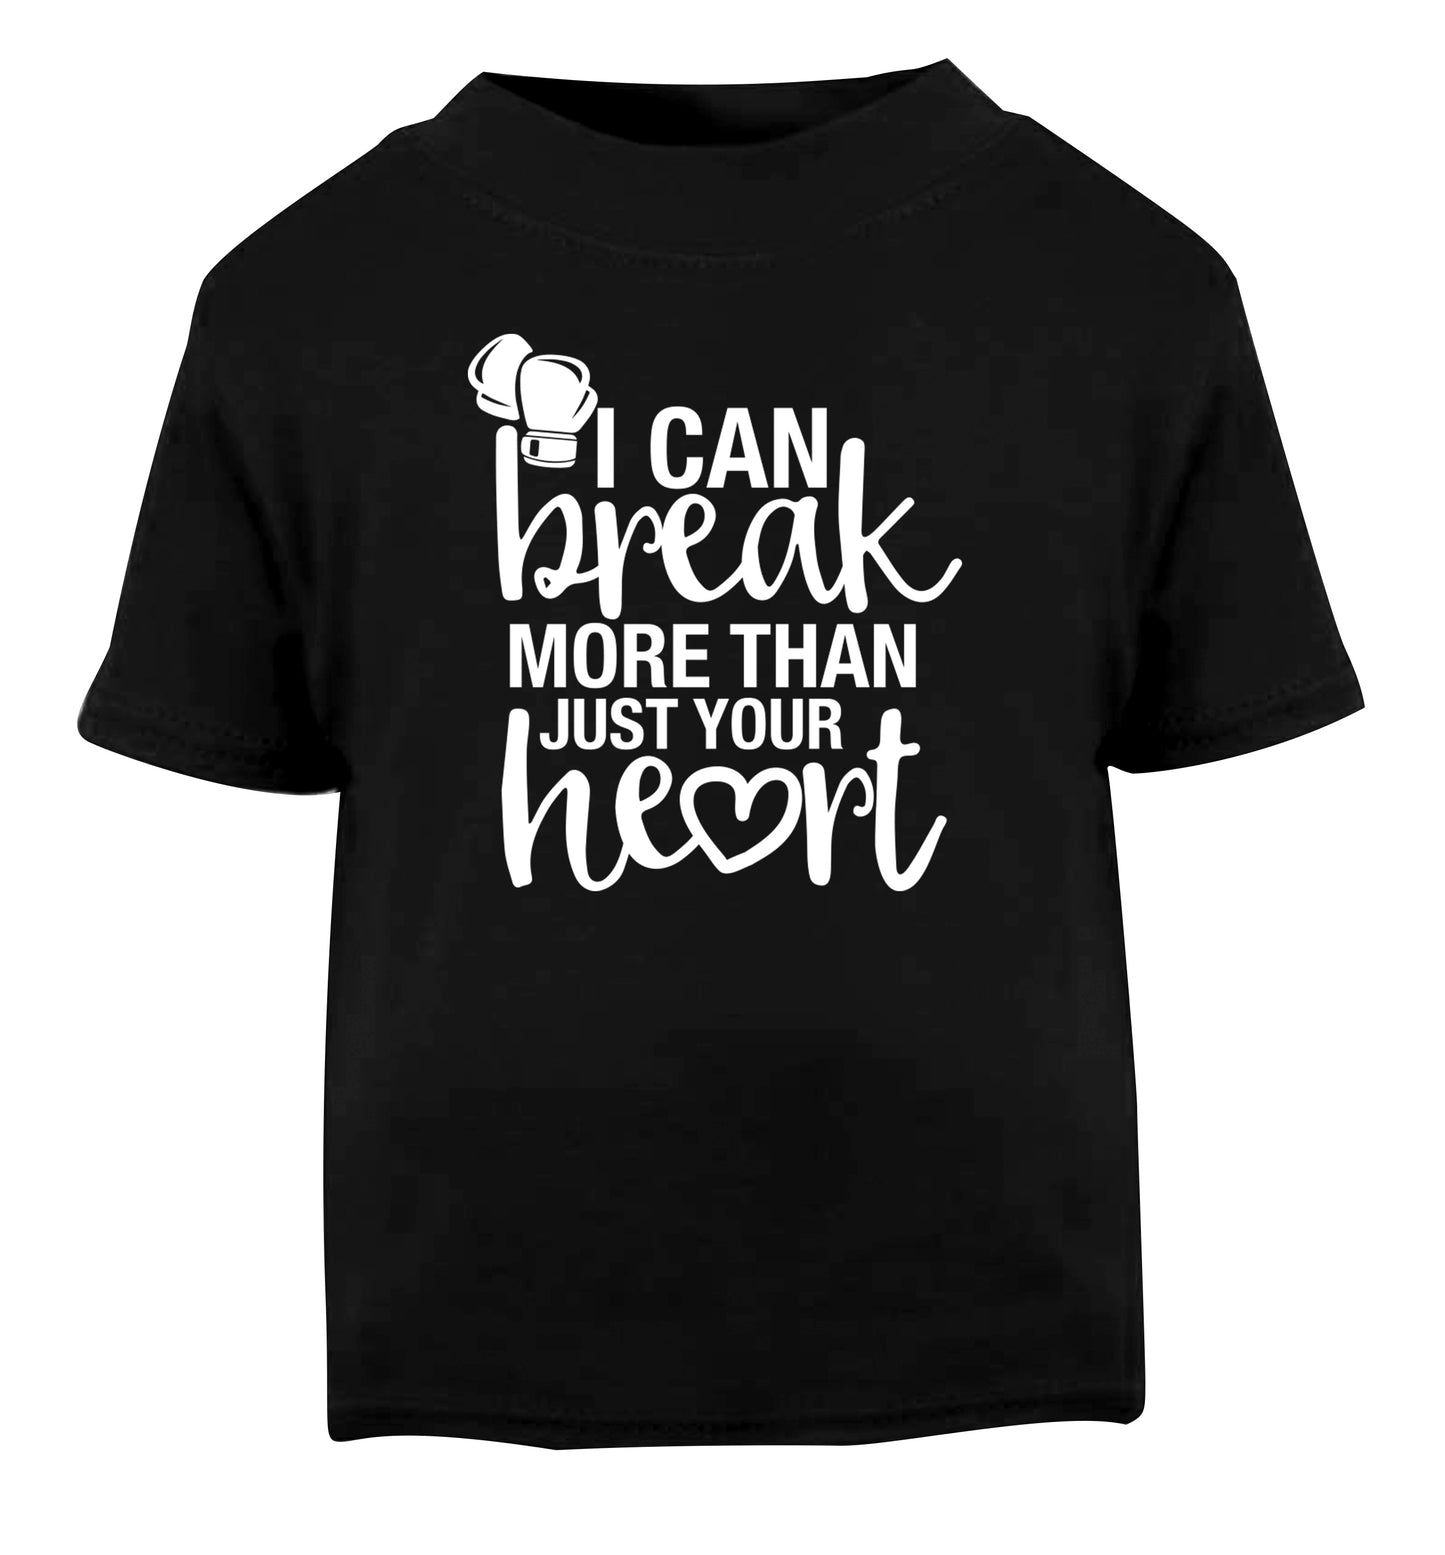 I can break more than just your heart Black Baby Toddler Tshirt 2 years